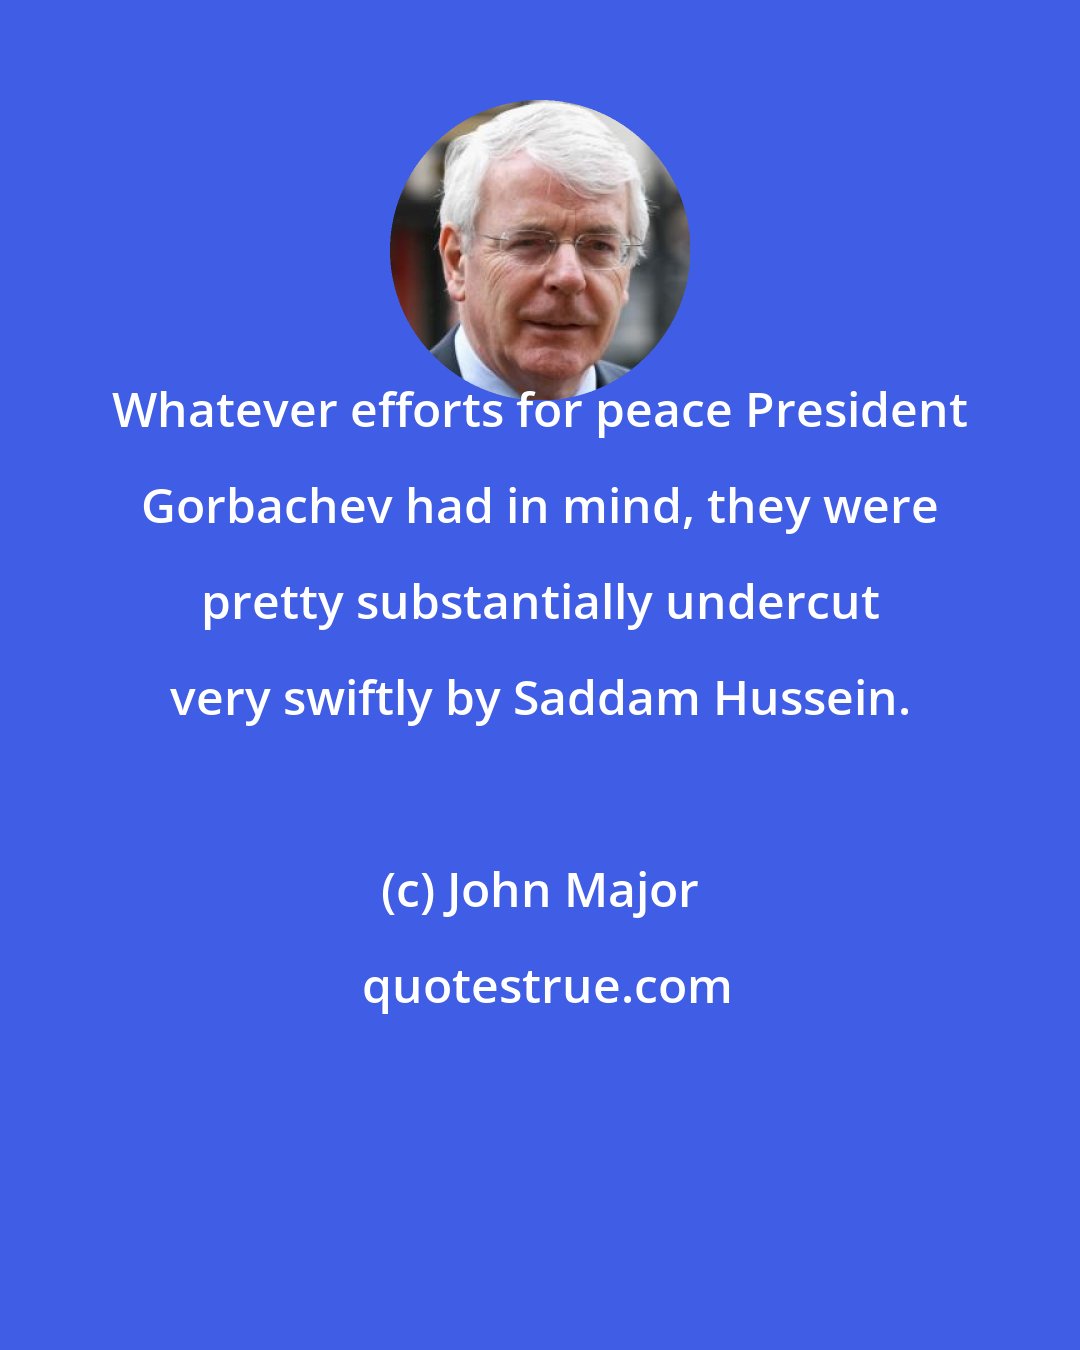 John Major: Whatever efforts for peace President Gorbachev had in mind, they were pretty substantially undercut very swiftly by Saddam Hussein.